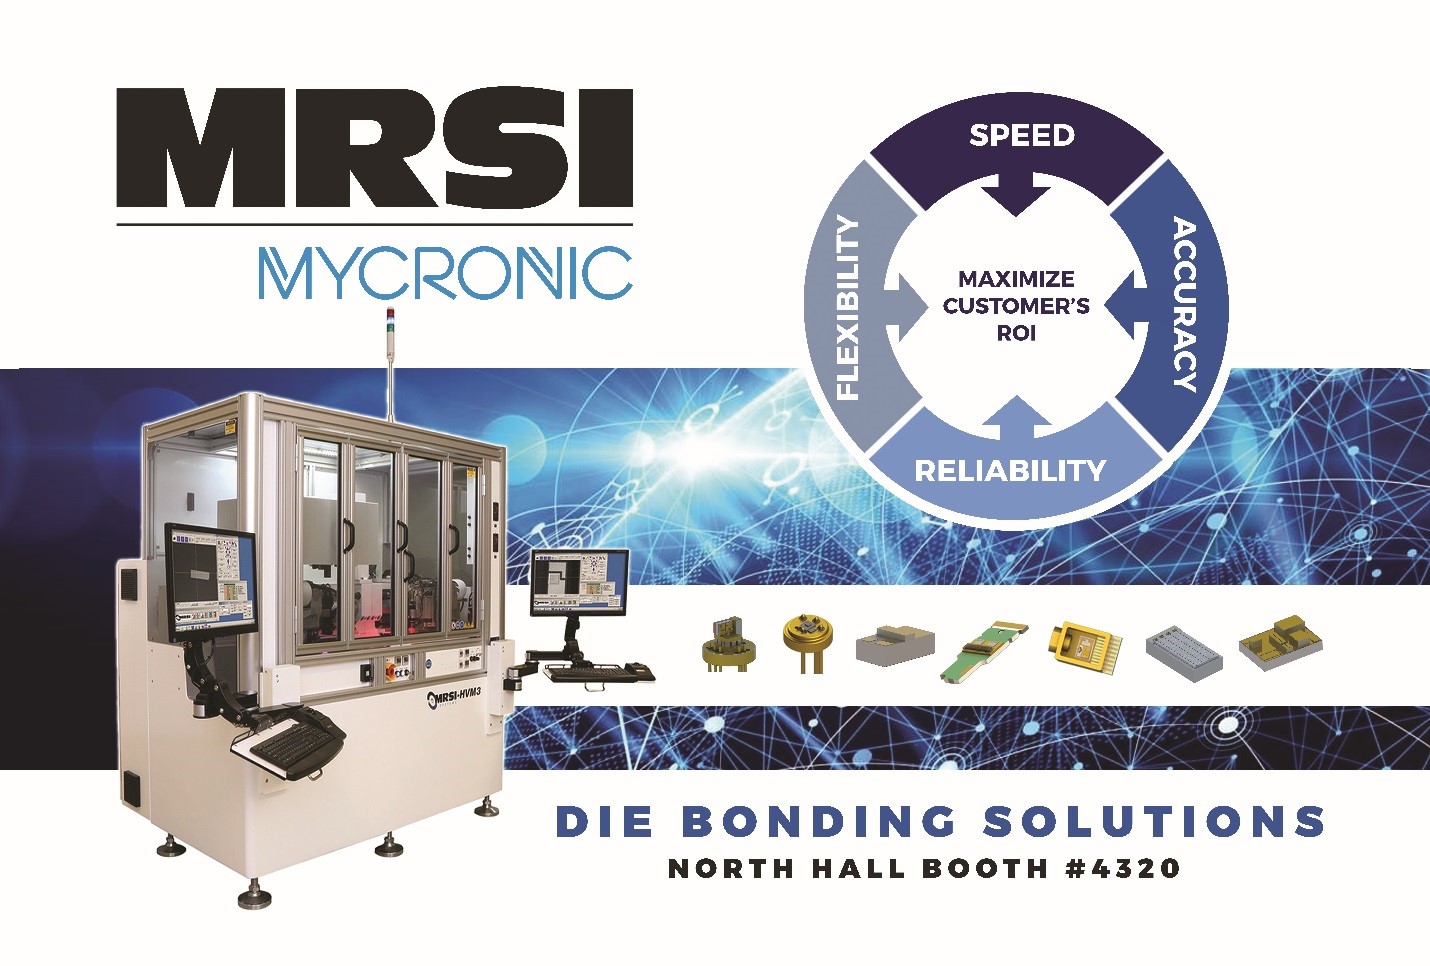 MRSI Systems is Exhibiting and Sponsoring SPIE Photonics West 2019